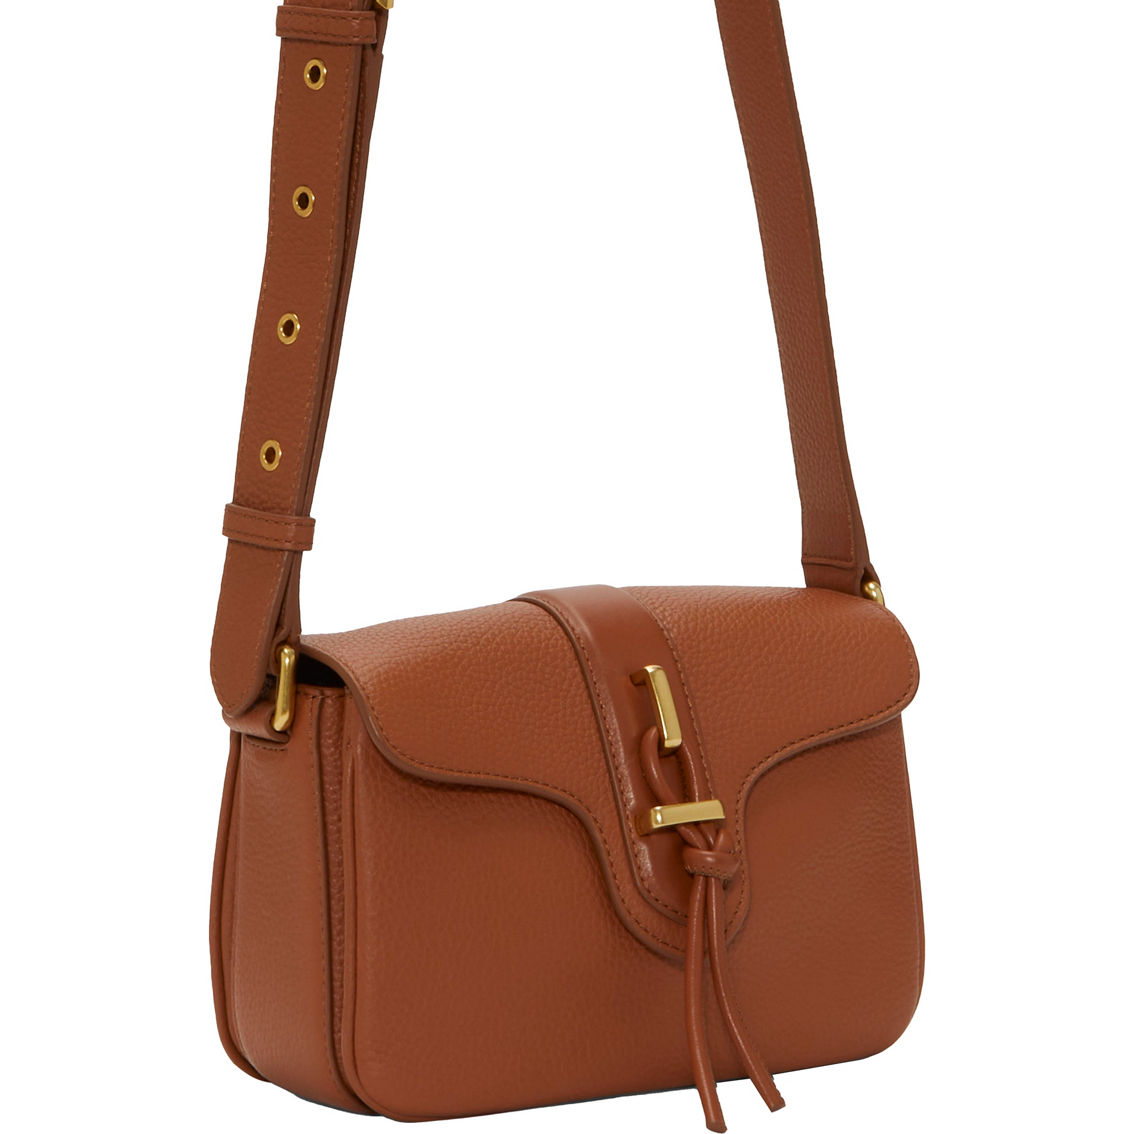 Vince Camuto Maecy Crossbody - Image 3 of 5